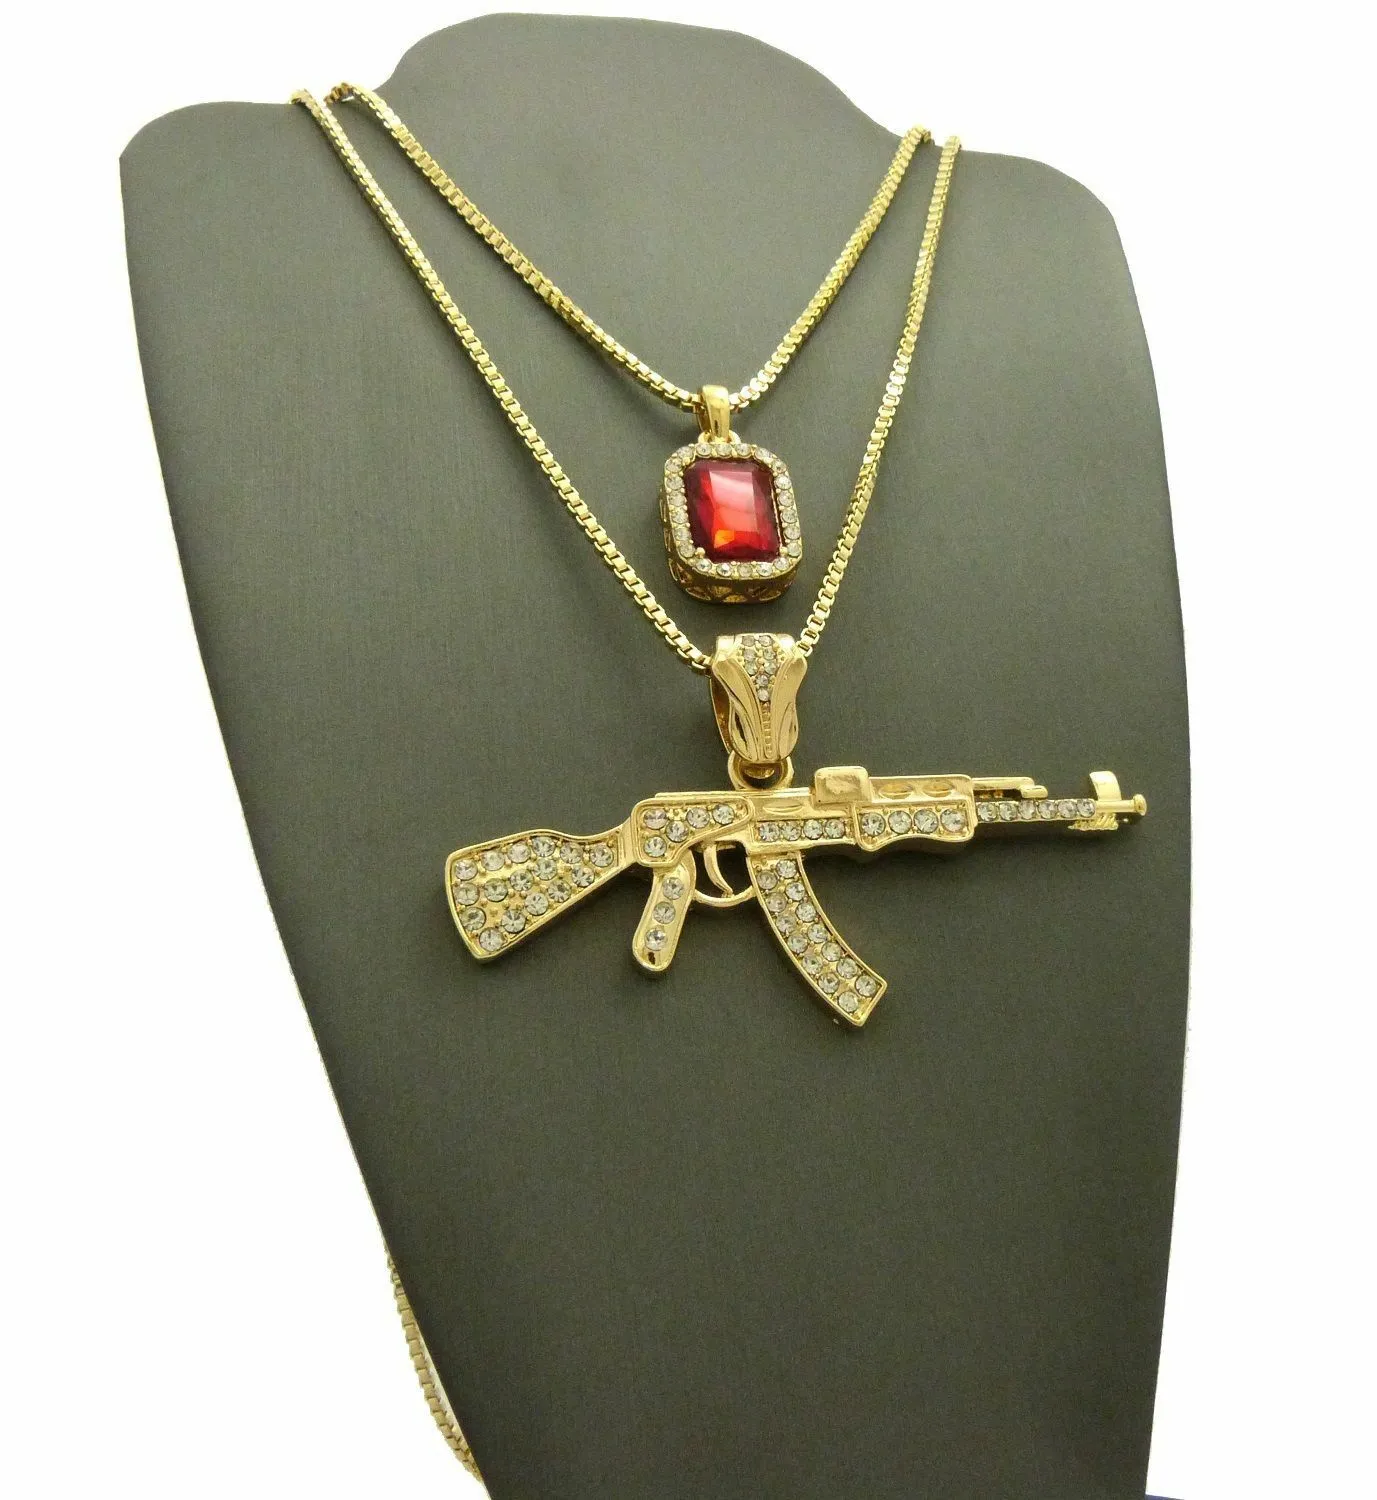 Buy Gold Ak47 Pendant Online In India - Etsy India